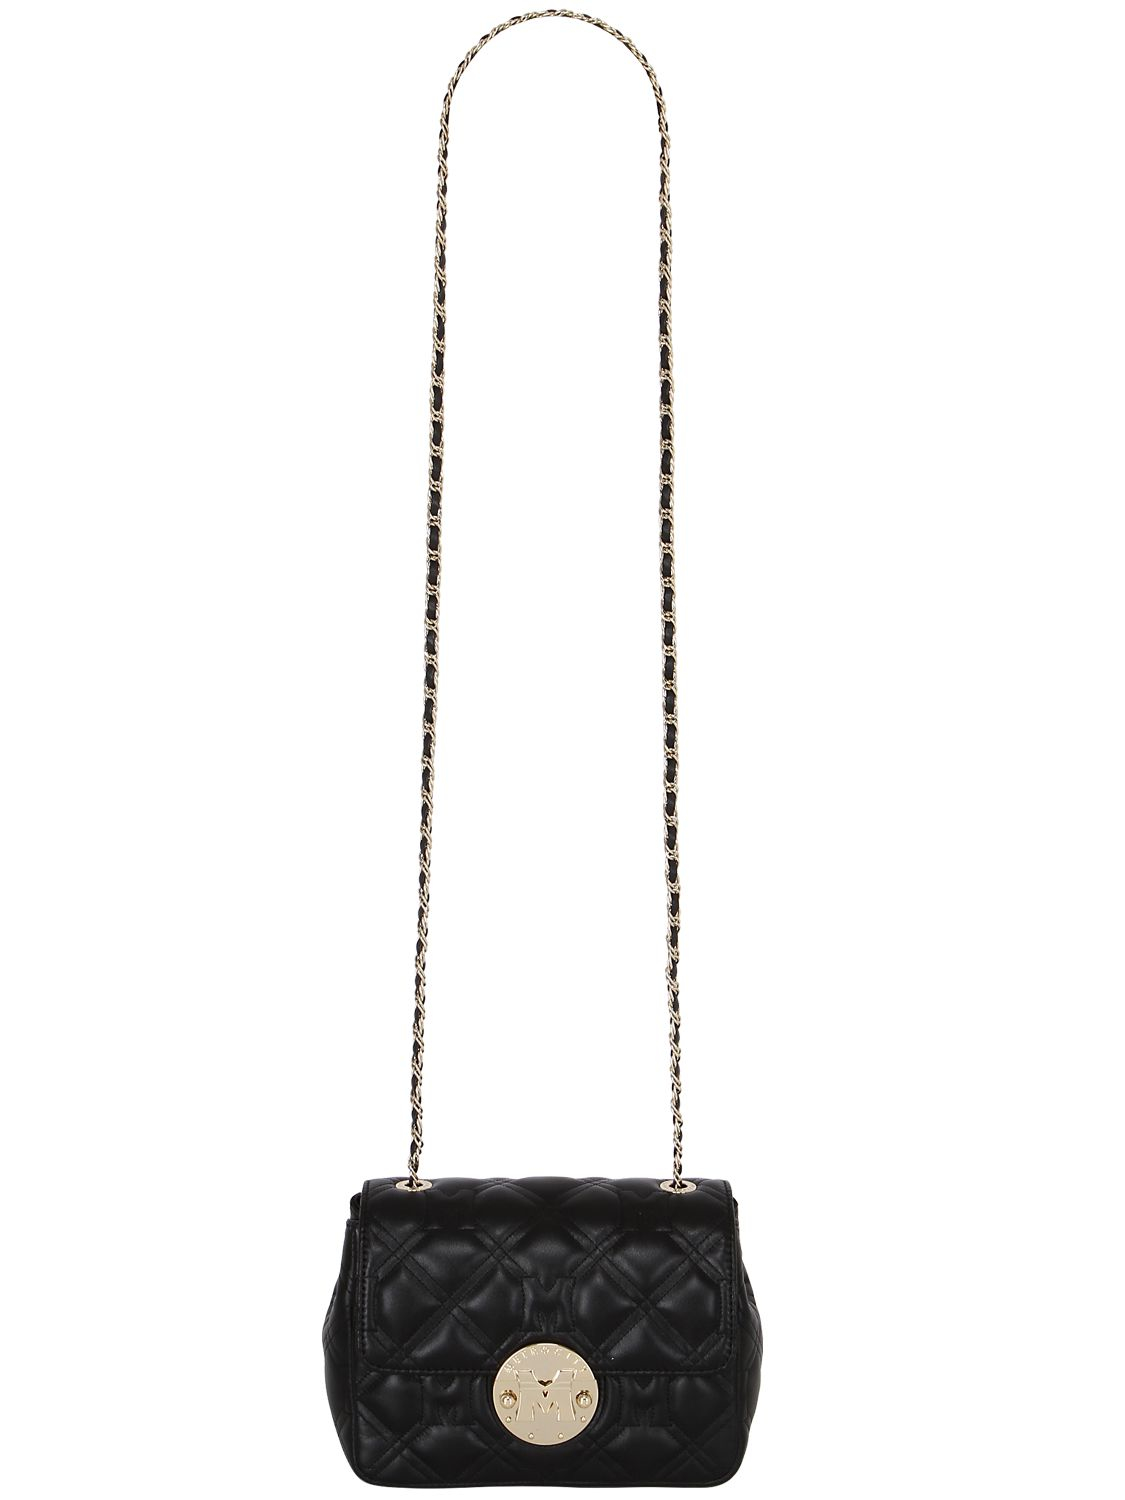 Lyst - Metrocity Quilted Leather Shoulder Bag in Black